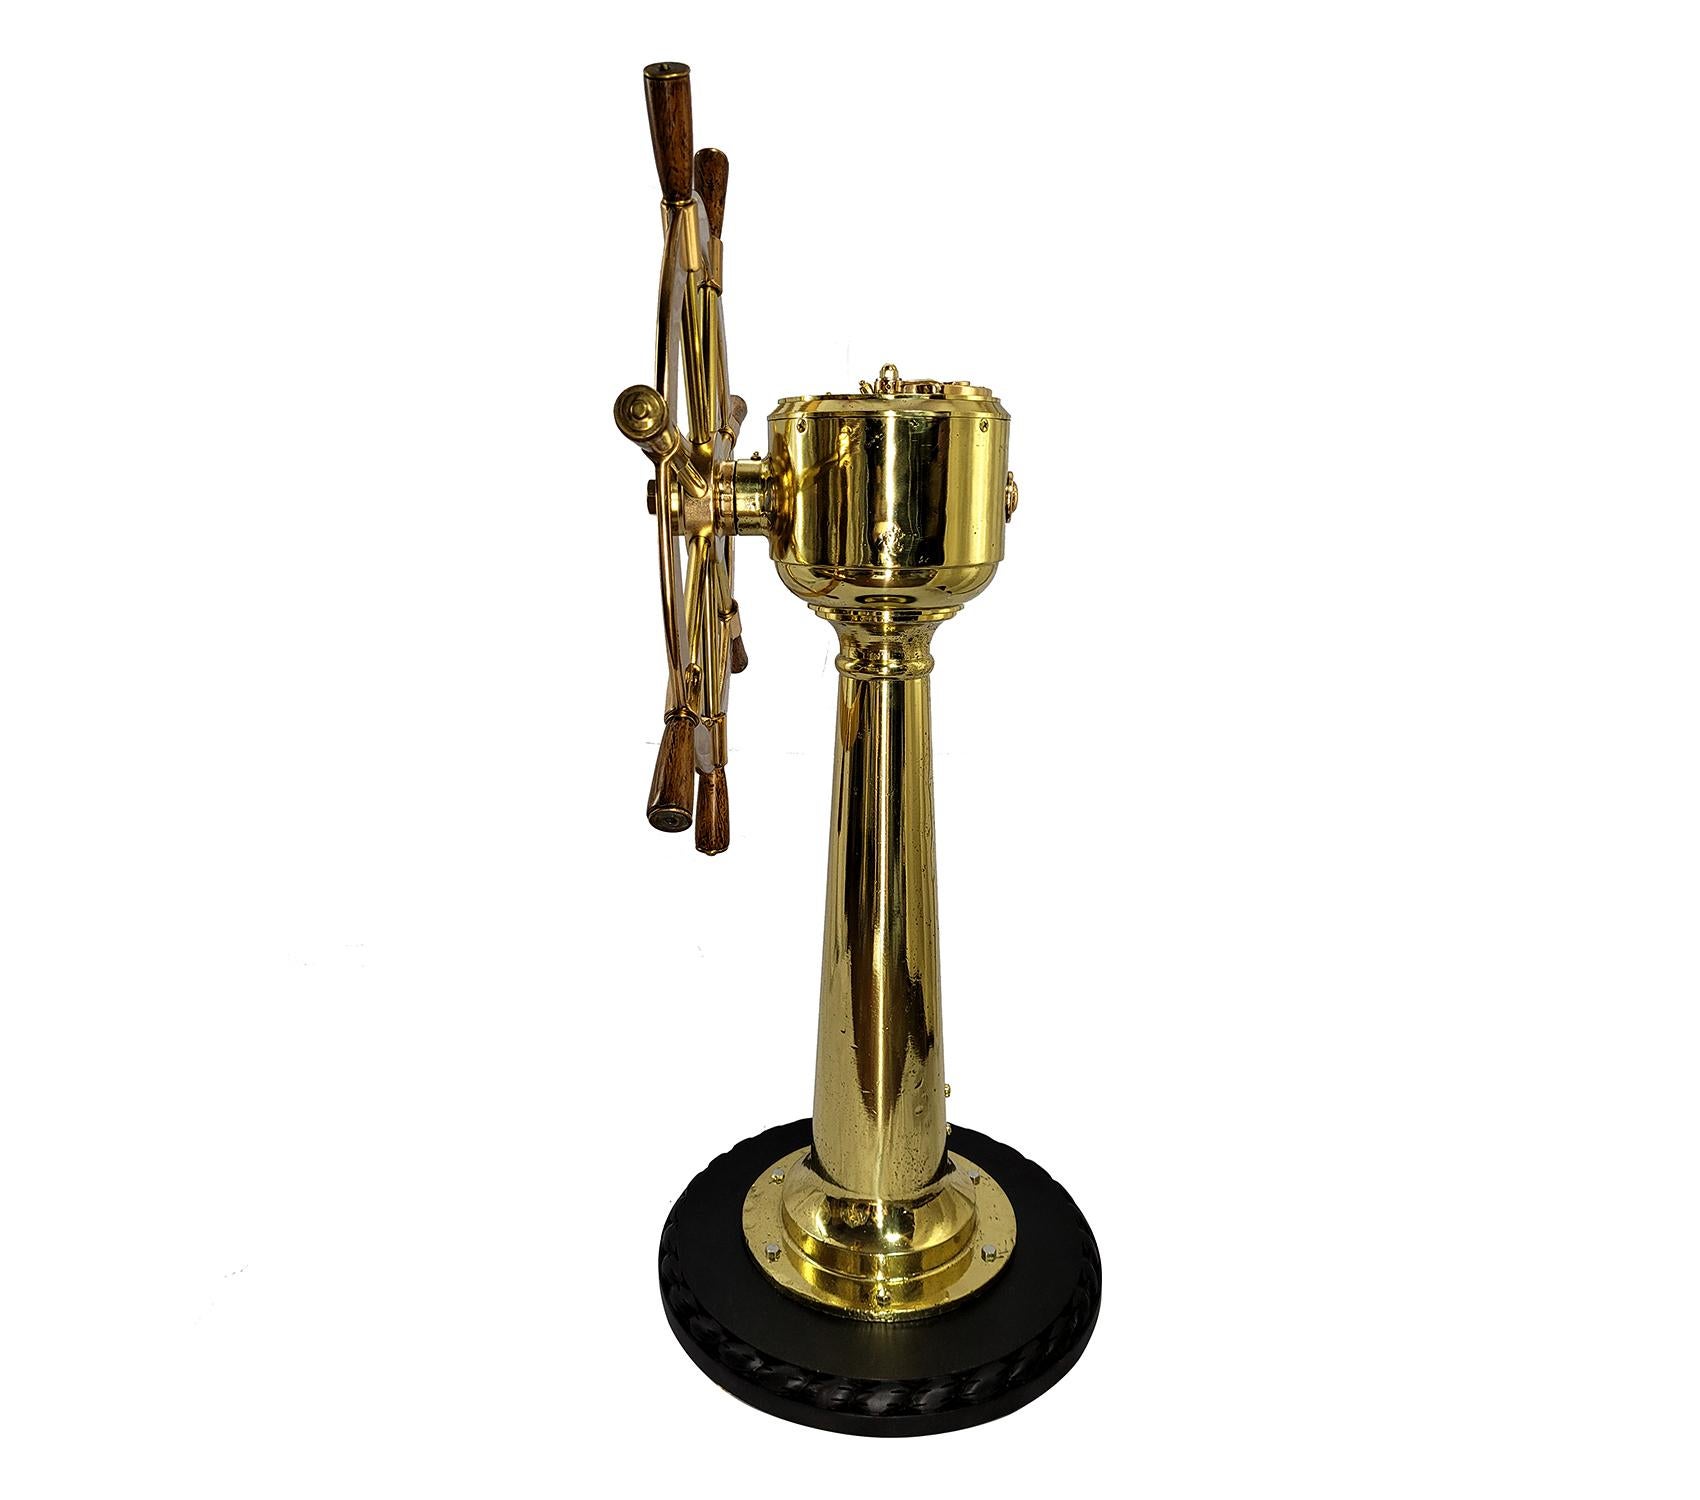 North American Solid Brass Ships Wheel on Stand For Sale